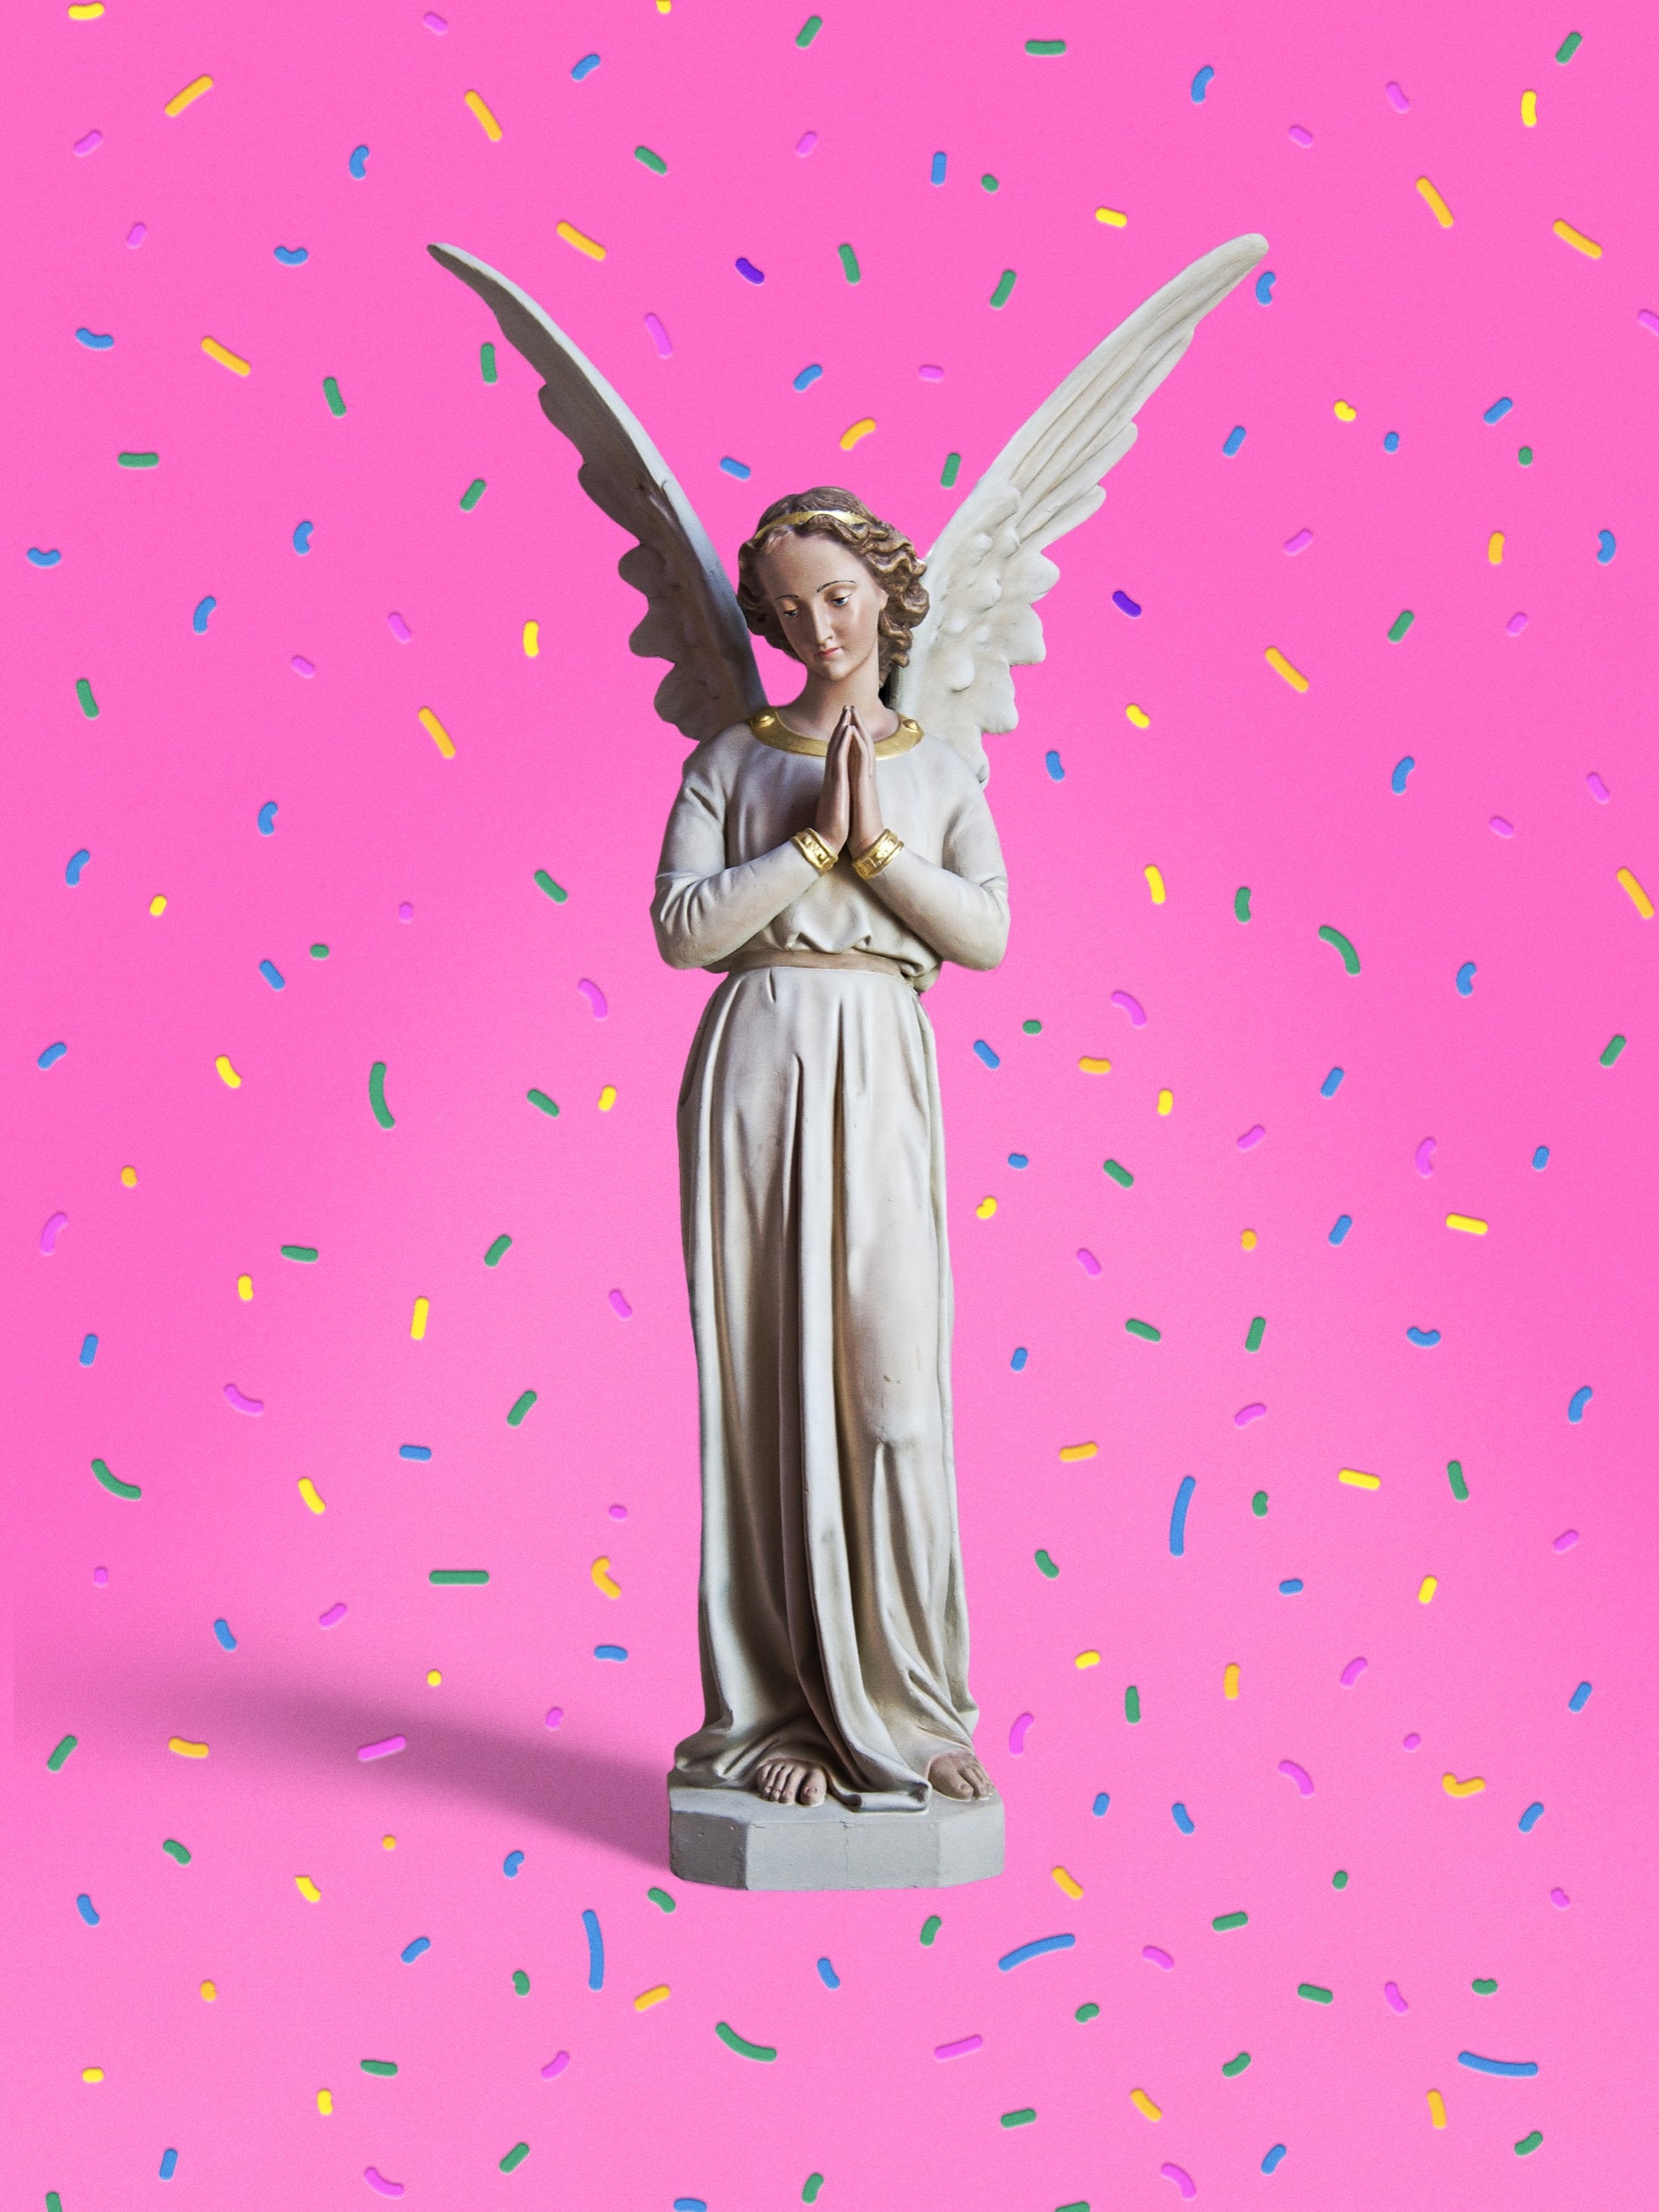 A statue of an angel praying in front of a pink backdrop with confetti.